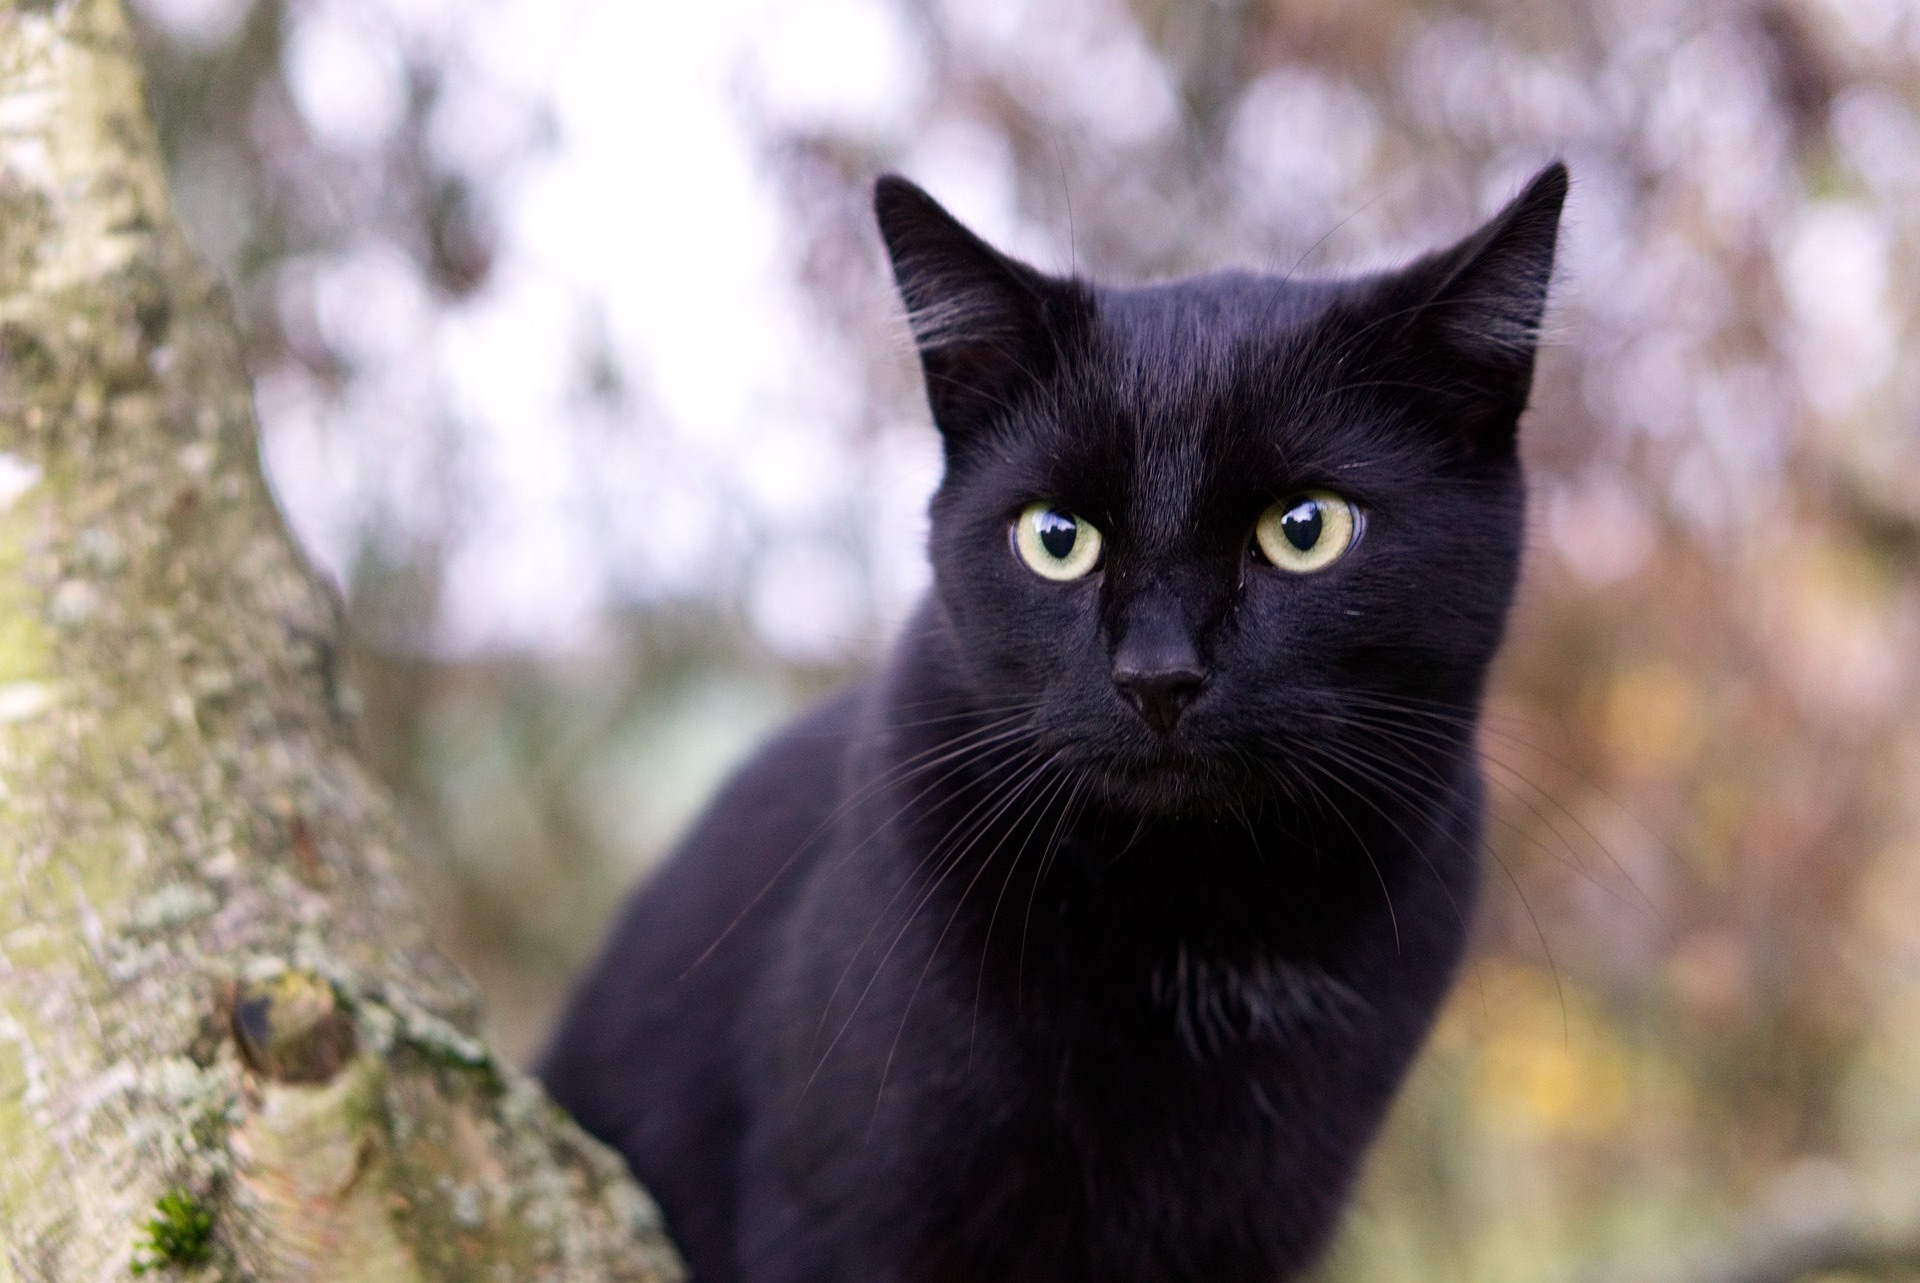 The Ultimate List of 10 Mind-Blowing Cat Facts - My Mini Panther